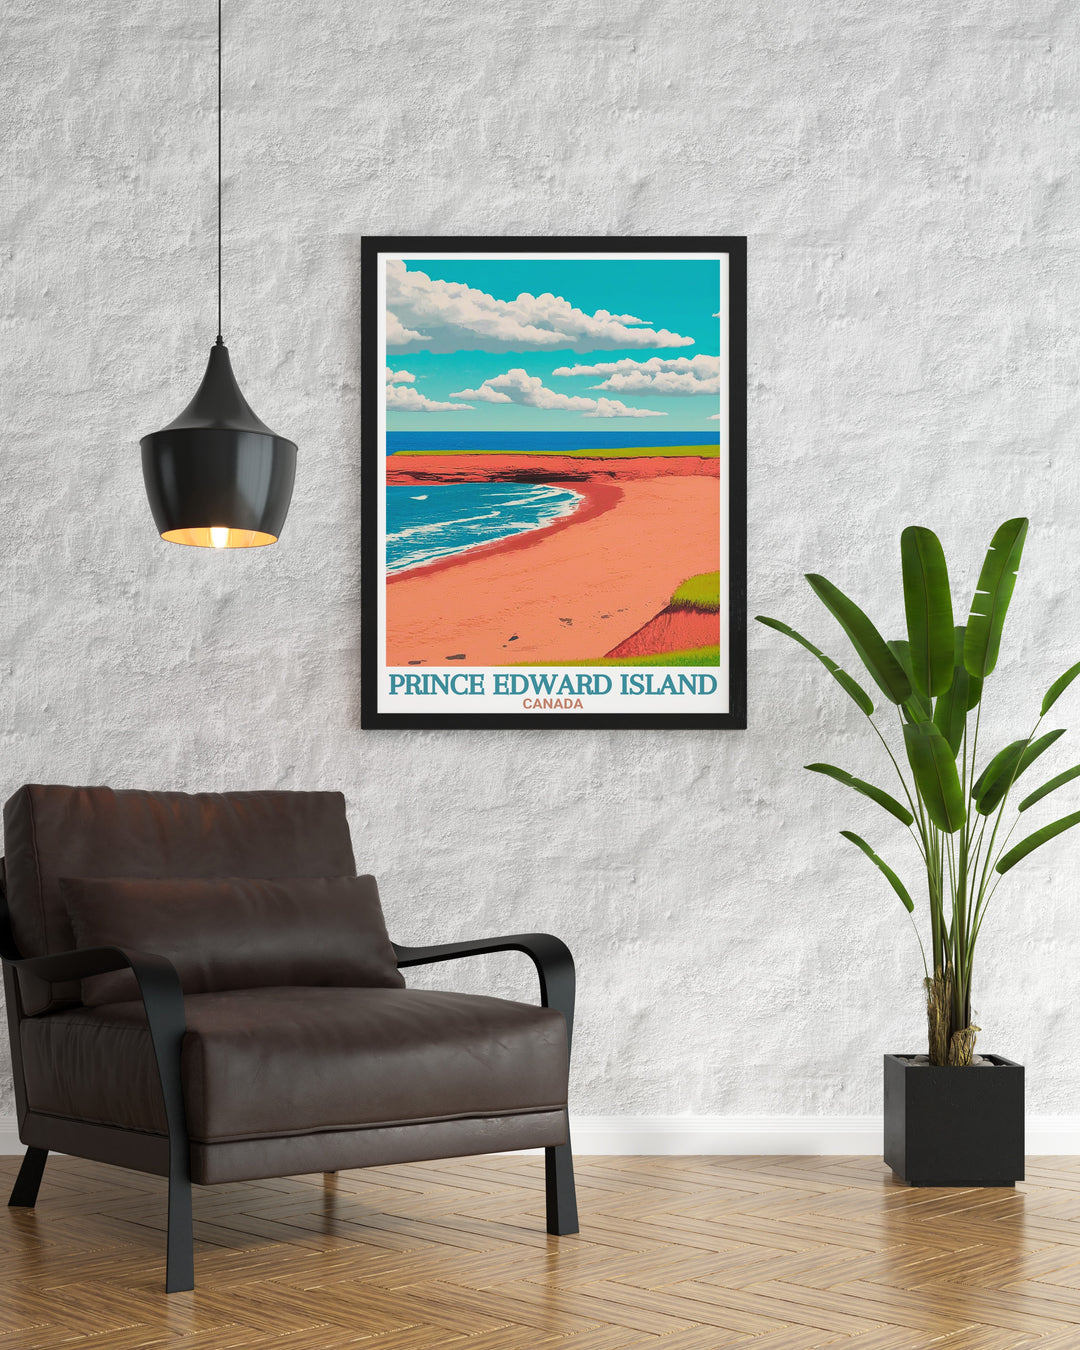 Enhance your living room with Cavendish Beach stunning prints showcasing the tranquil beach views and picturesque lighthouse of Prince Edward Island providing perfect wall décor that exudes elegance and charm for your home.